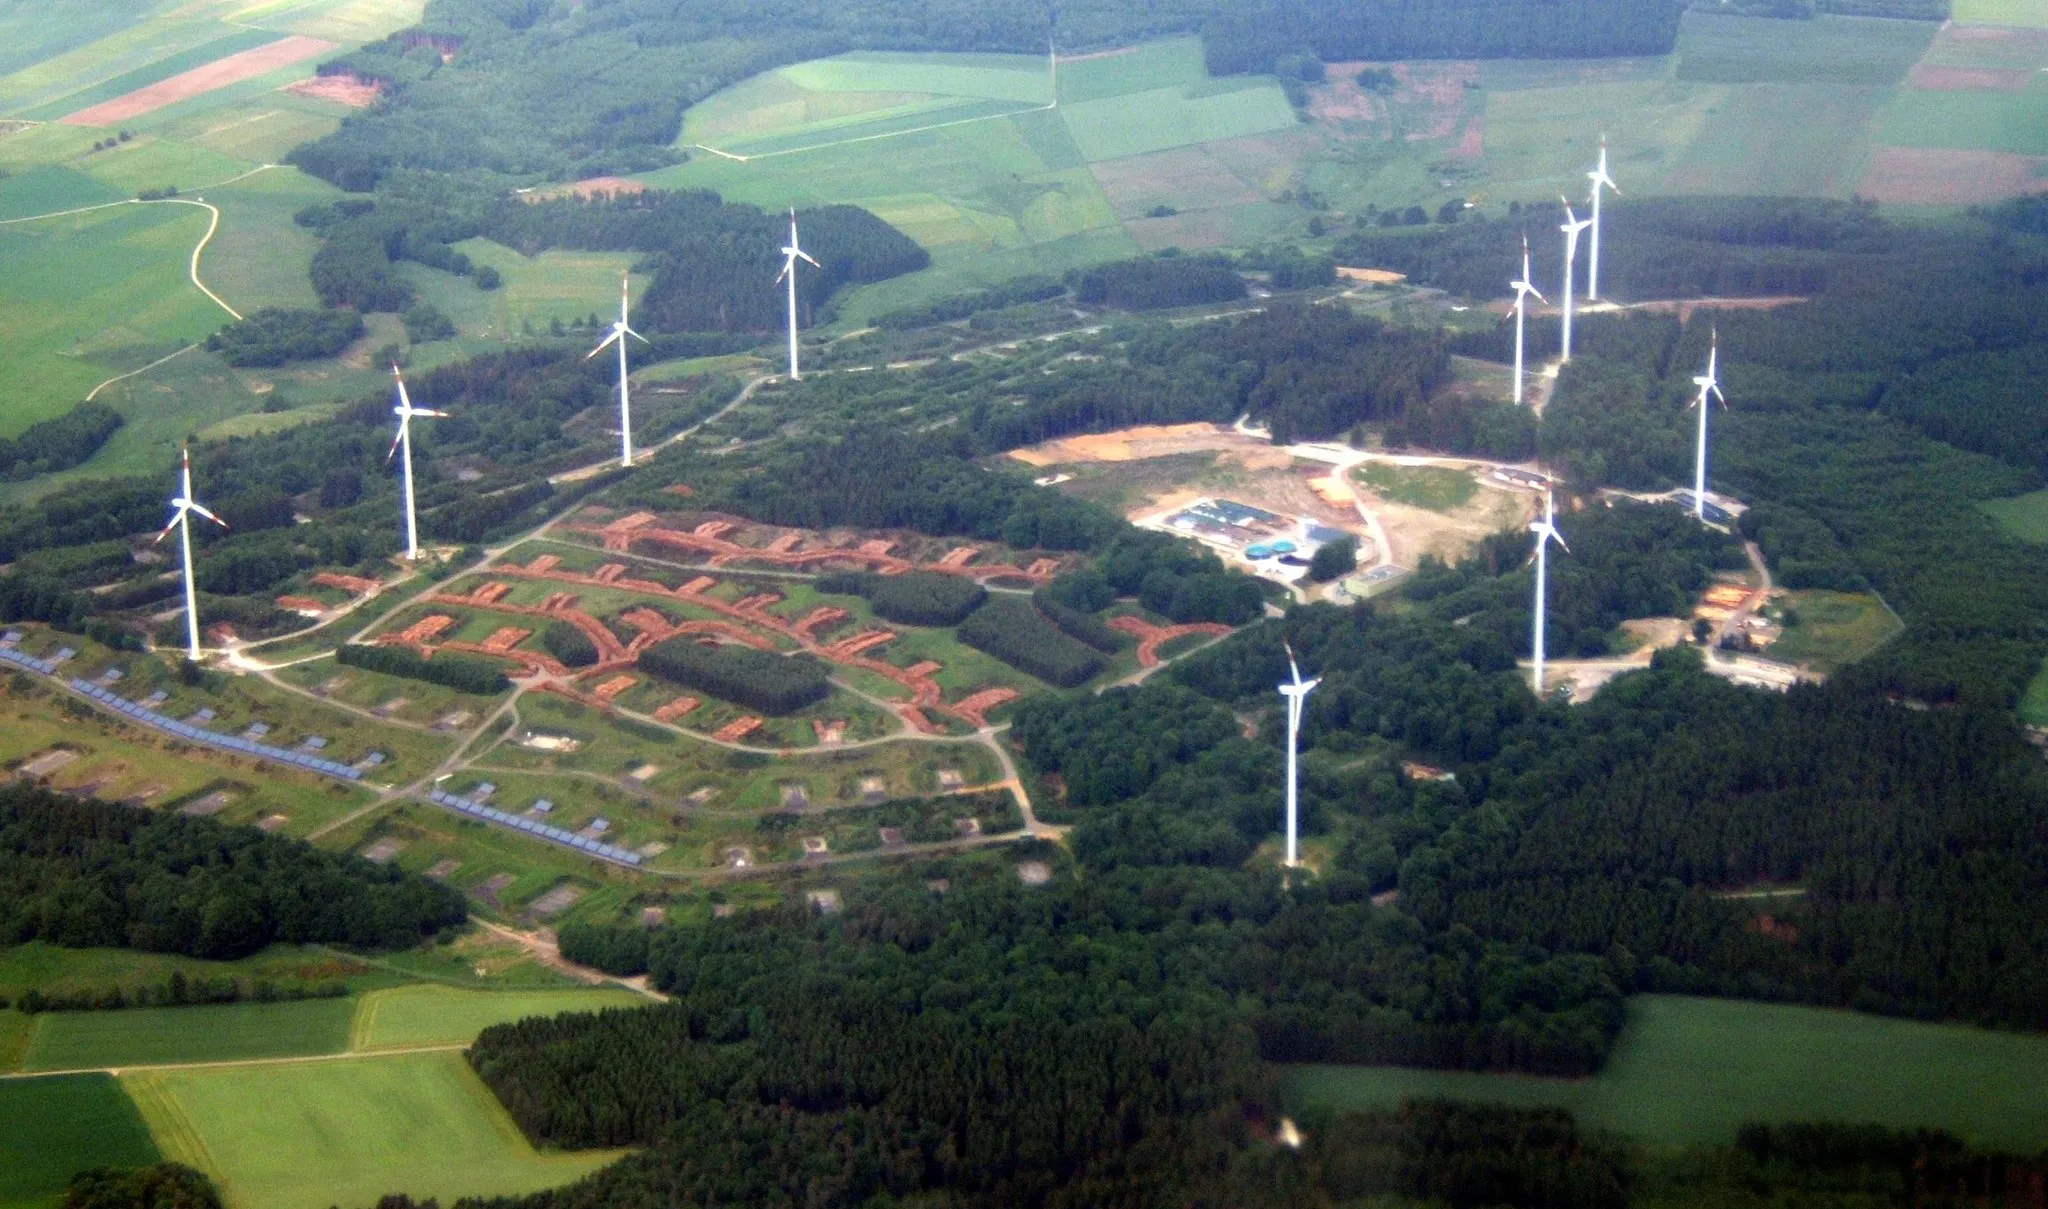 Photo showing: Aerial view of Energiepark Morbach (photovoltaics and wind turbines), near Morbach,  Bernkastel-Wittlich, Rhineland-Palatinate, Germany. Picture taken from a plane that was about to land at Frankfurt Hahn airport. (Formerly Hahn Air Base)  This property served as a Non-Nuclear Munitions Storage Area for the United States Air Force from the 1950's through the early 1990's. The Energiepark property is situated near the small towns of Wenigerath, Gonzerath, Heinzerath and Morbach. The wind turbines are Vestas V80-2MW units.